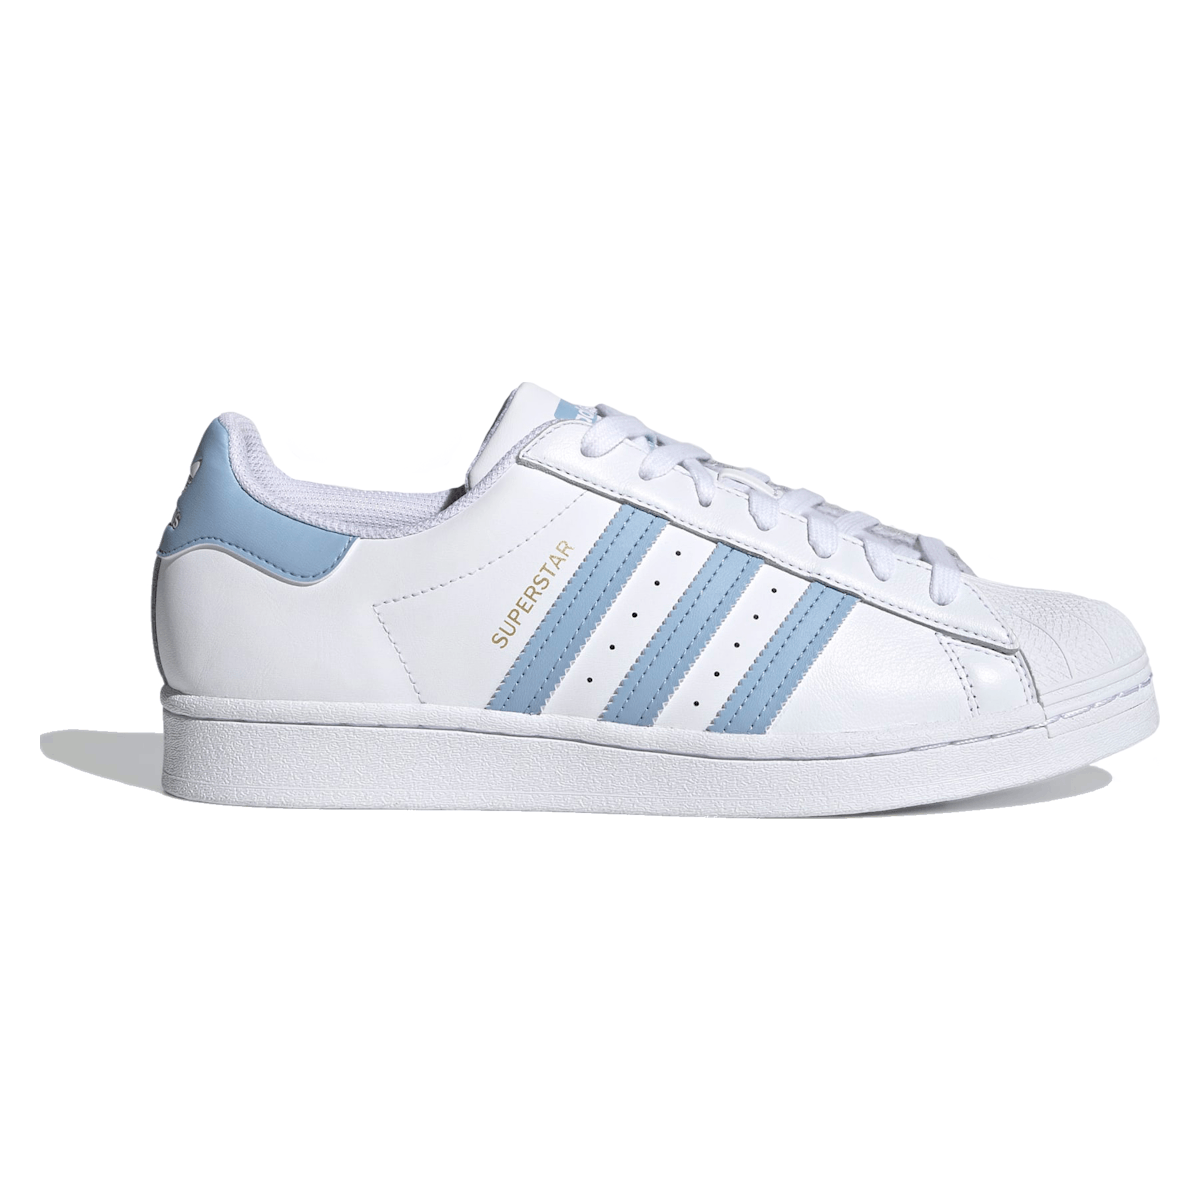 adidas Superstar White Ambient Sky Gold